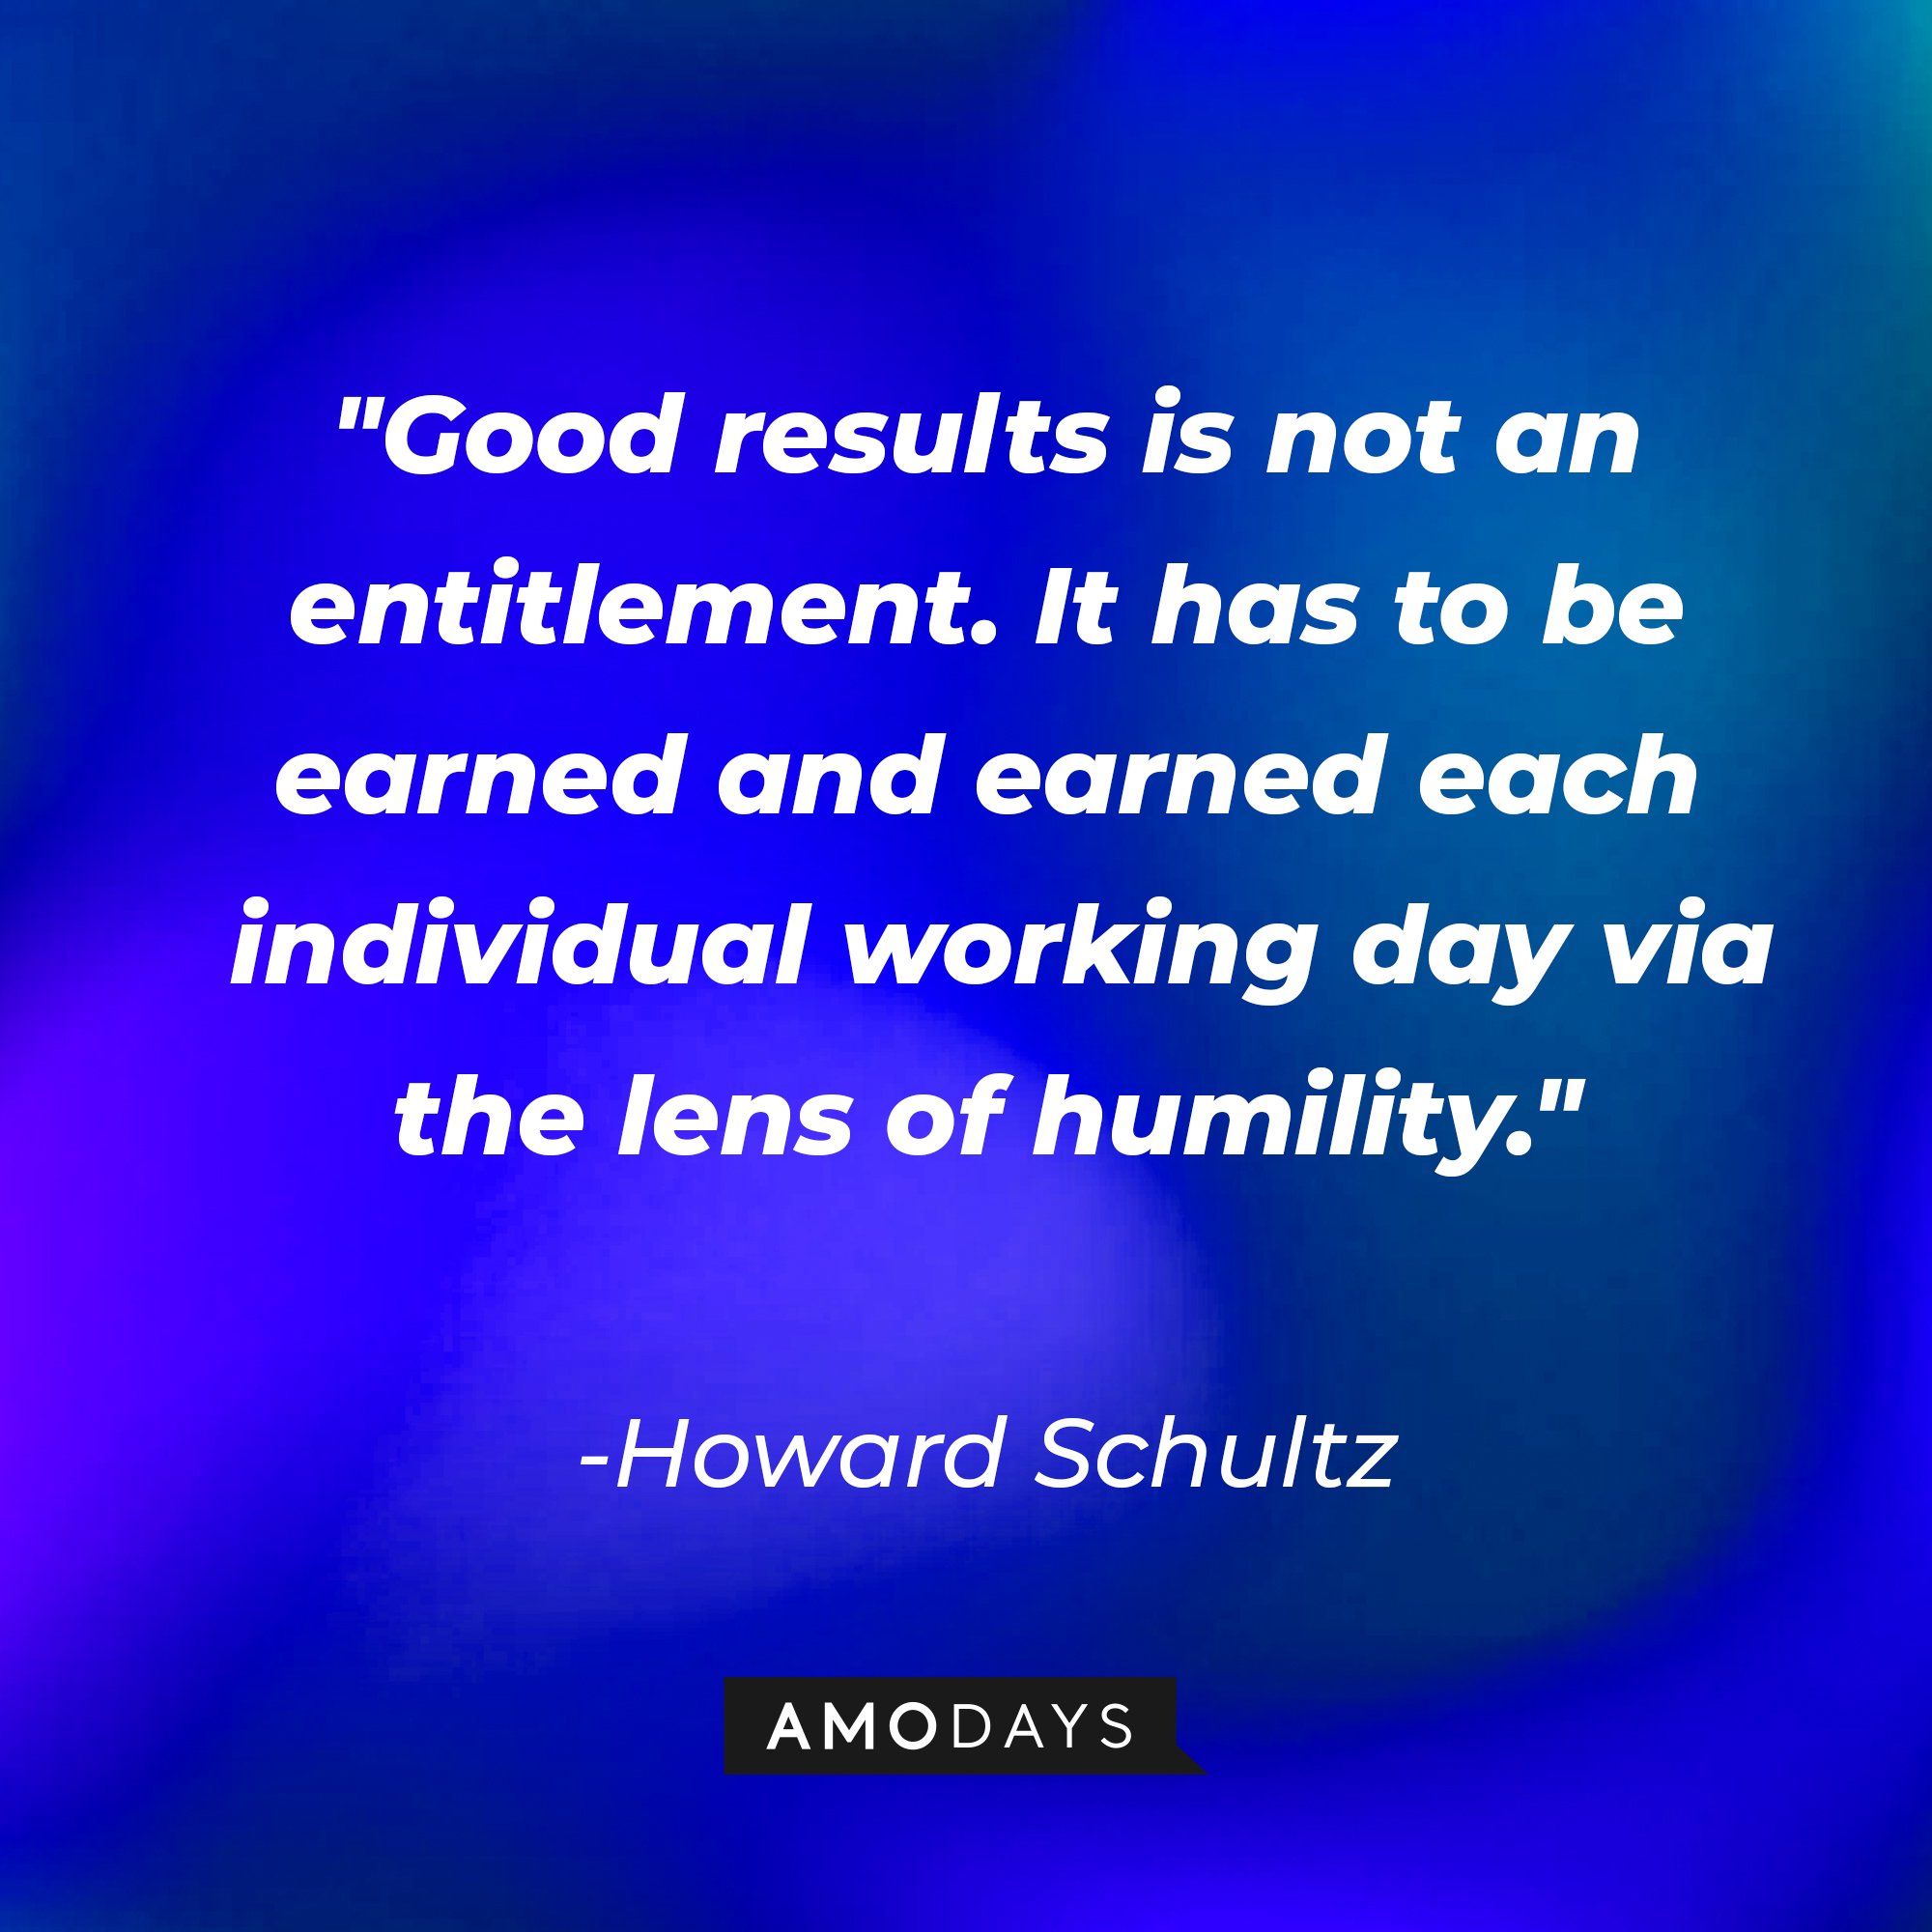 Howard Schultz’s quote: "Good results is not an entitlement. It has to be earned and earned each individual working day via the lens of humility." | Image: AmoDays